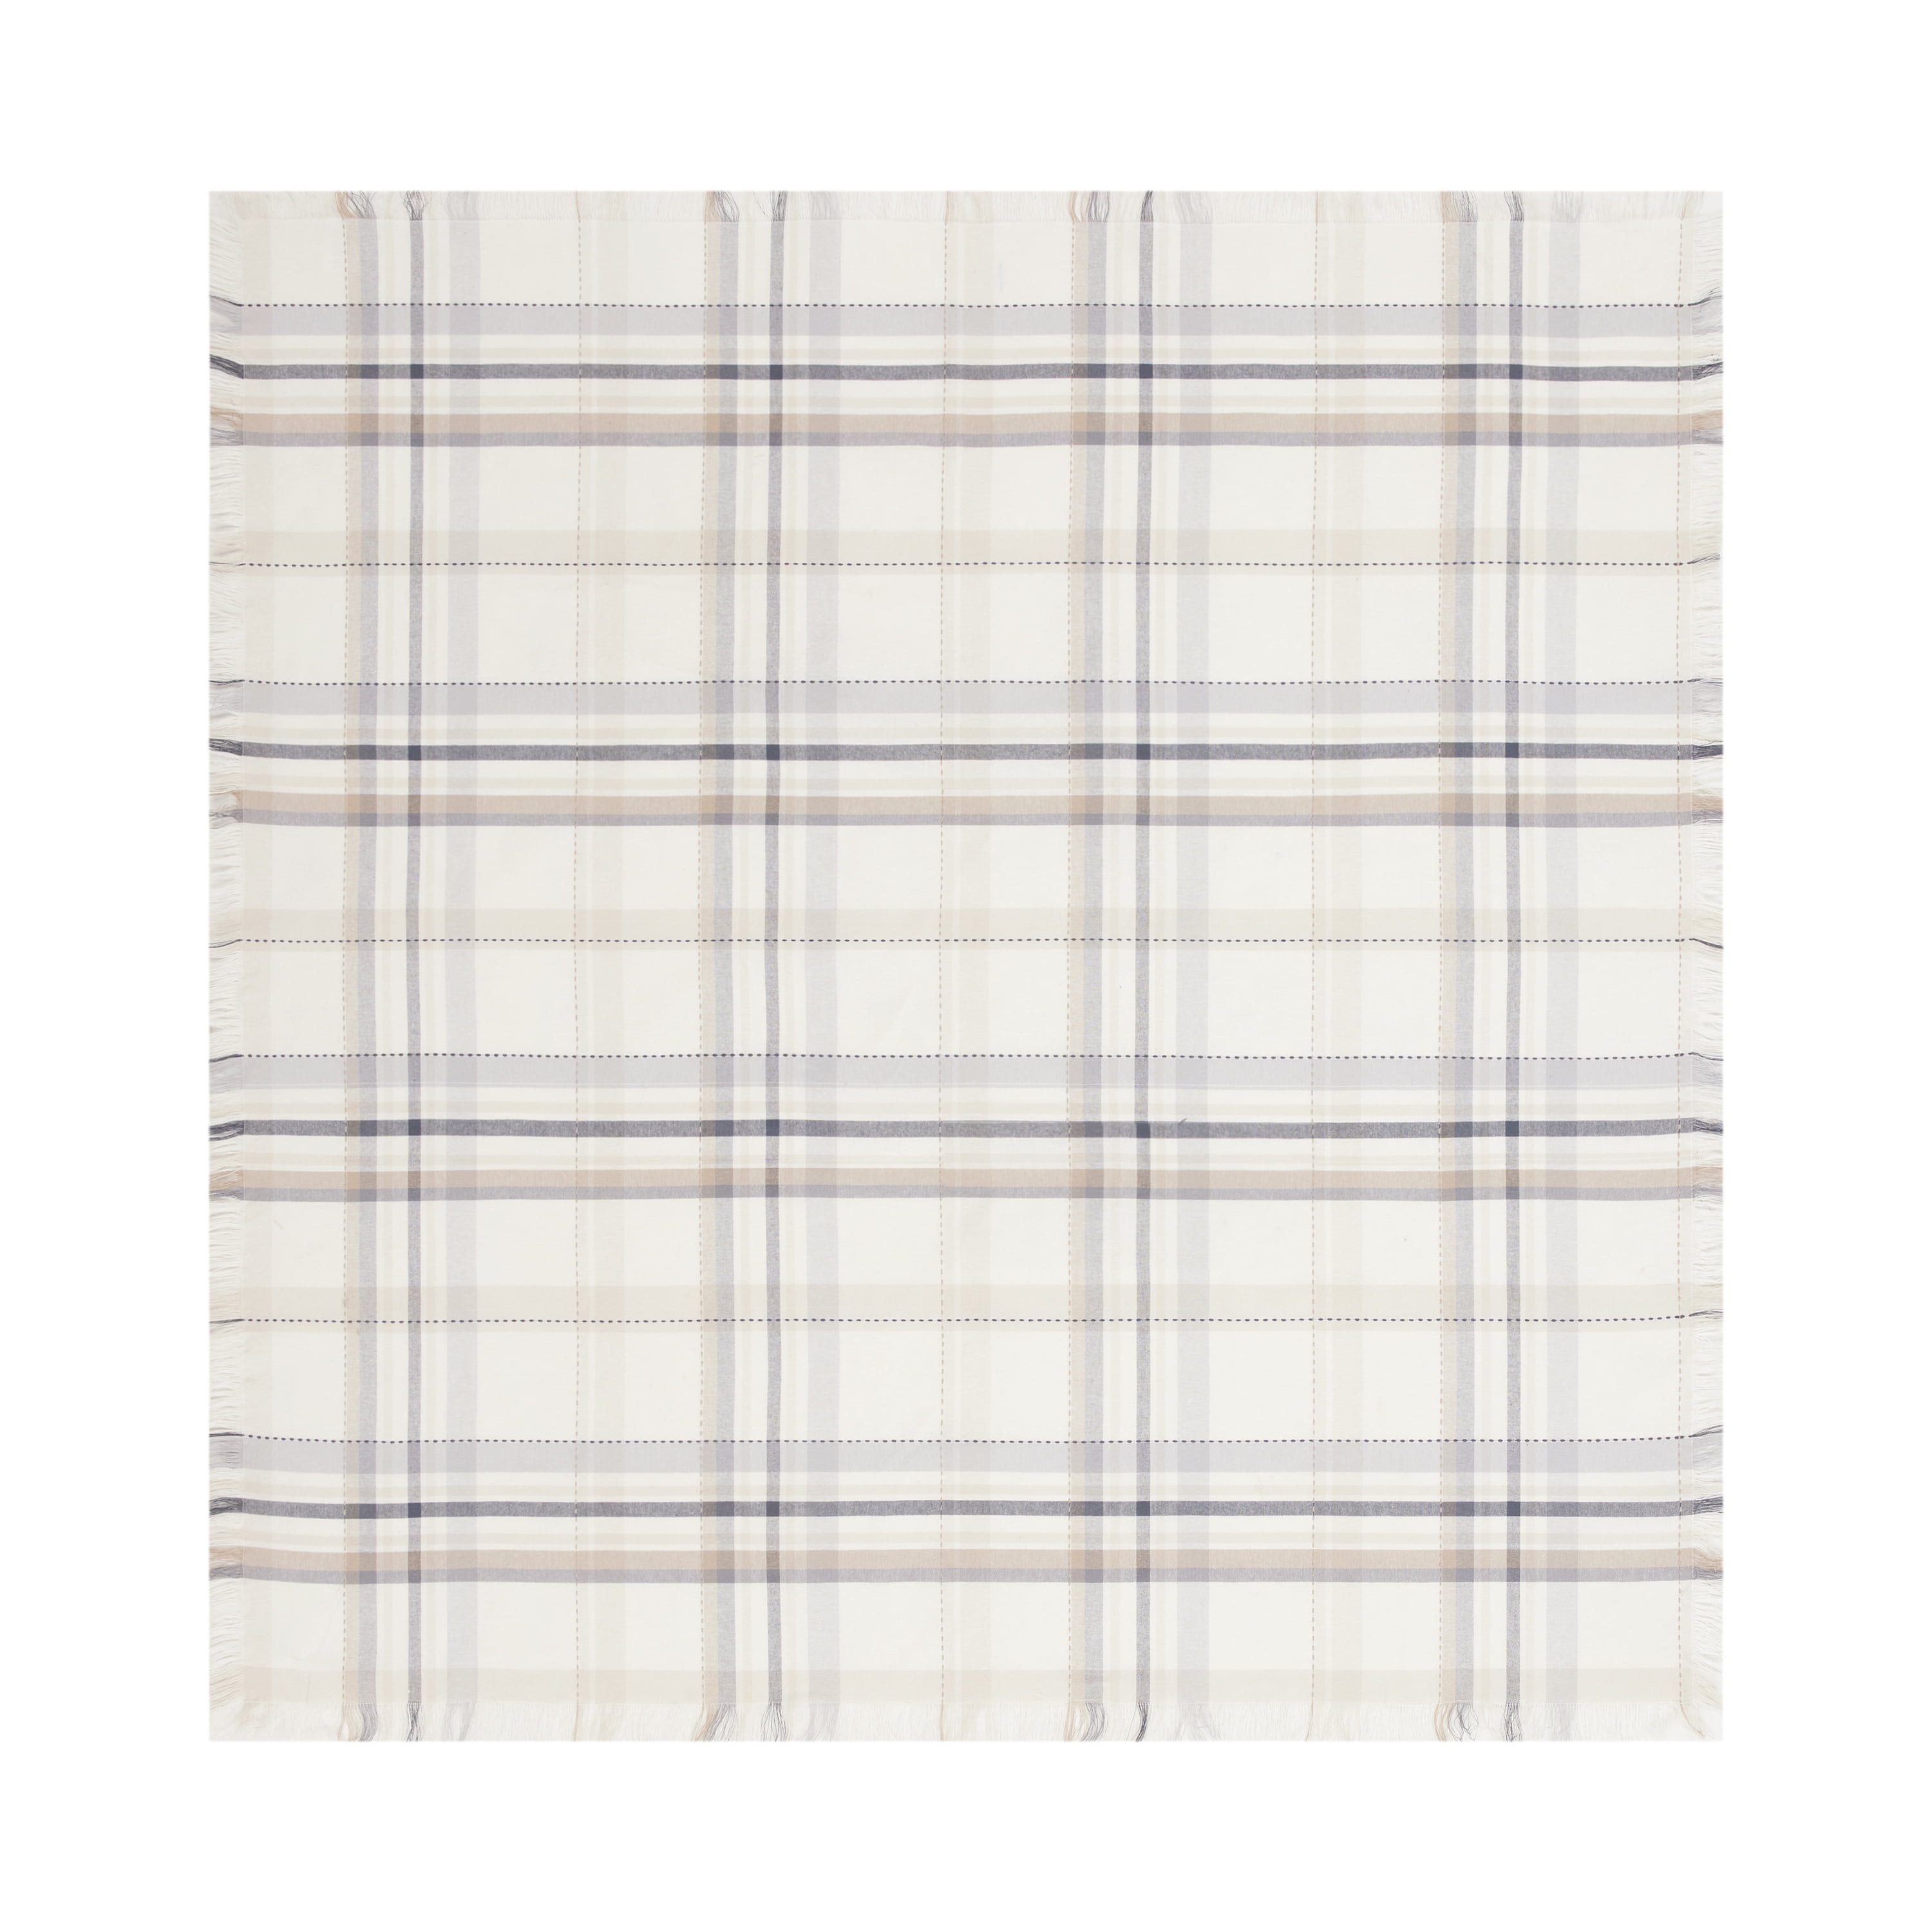 Better Homes and Gardens Monday Plaid Woven Table Throw - Multi color - 50"x50"